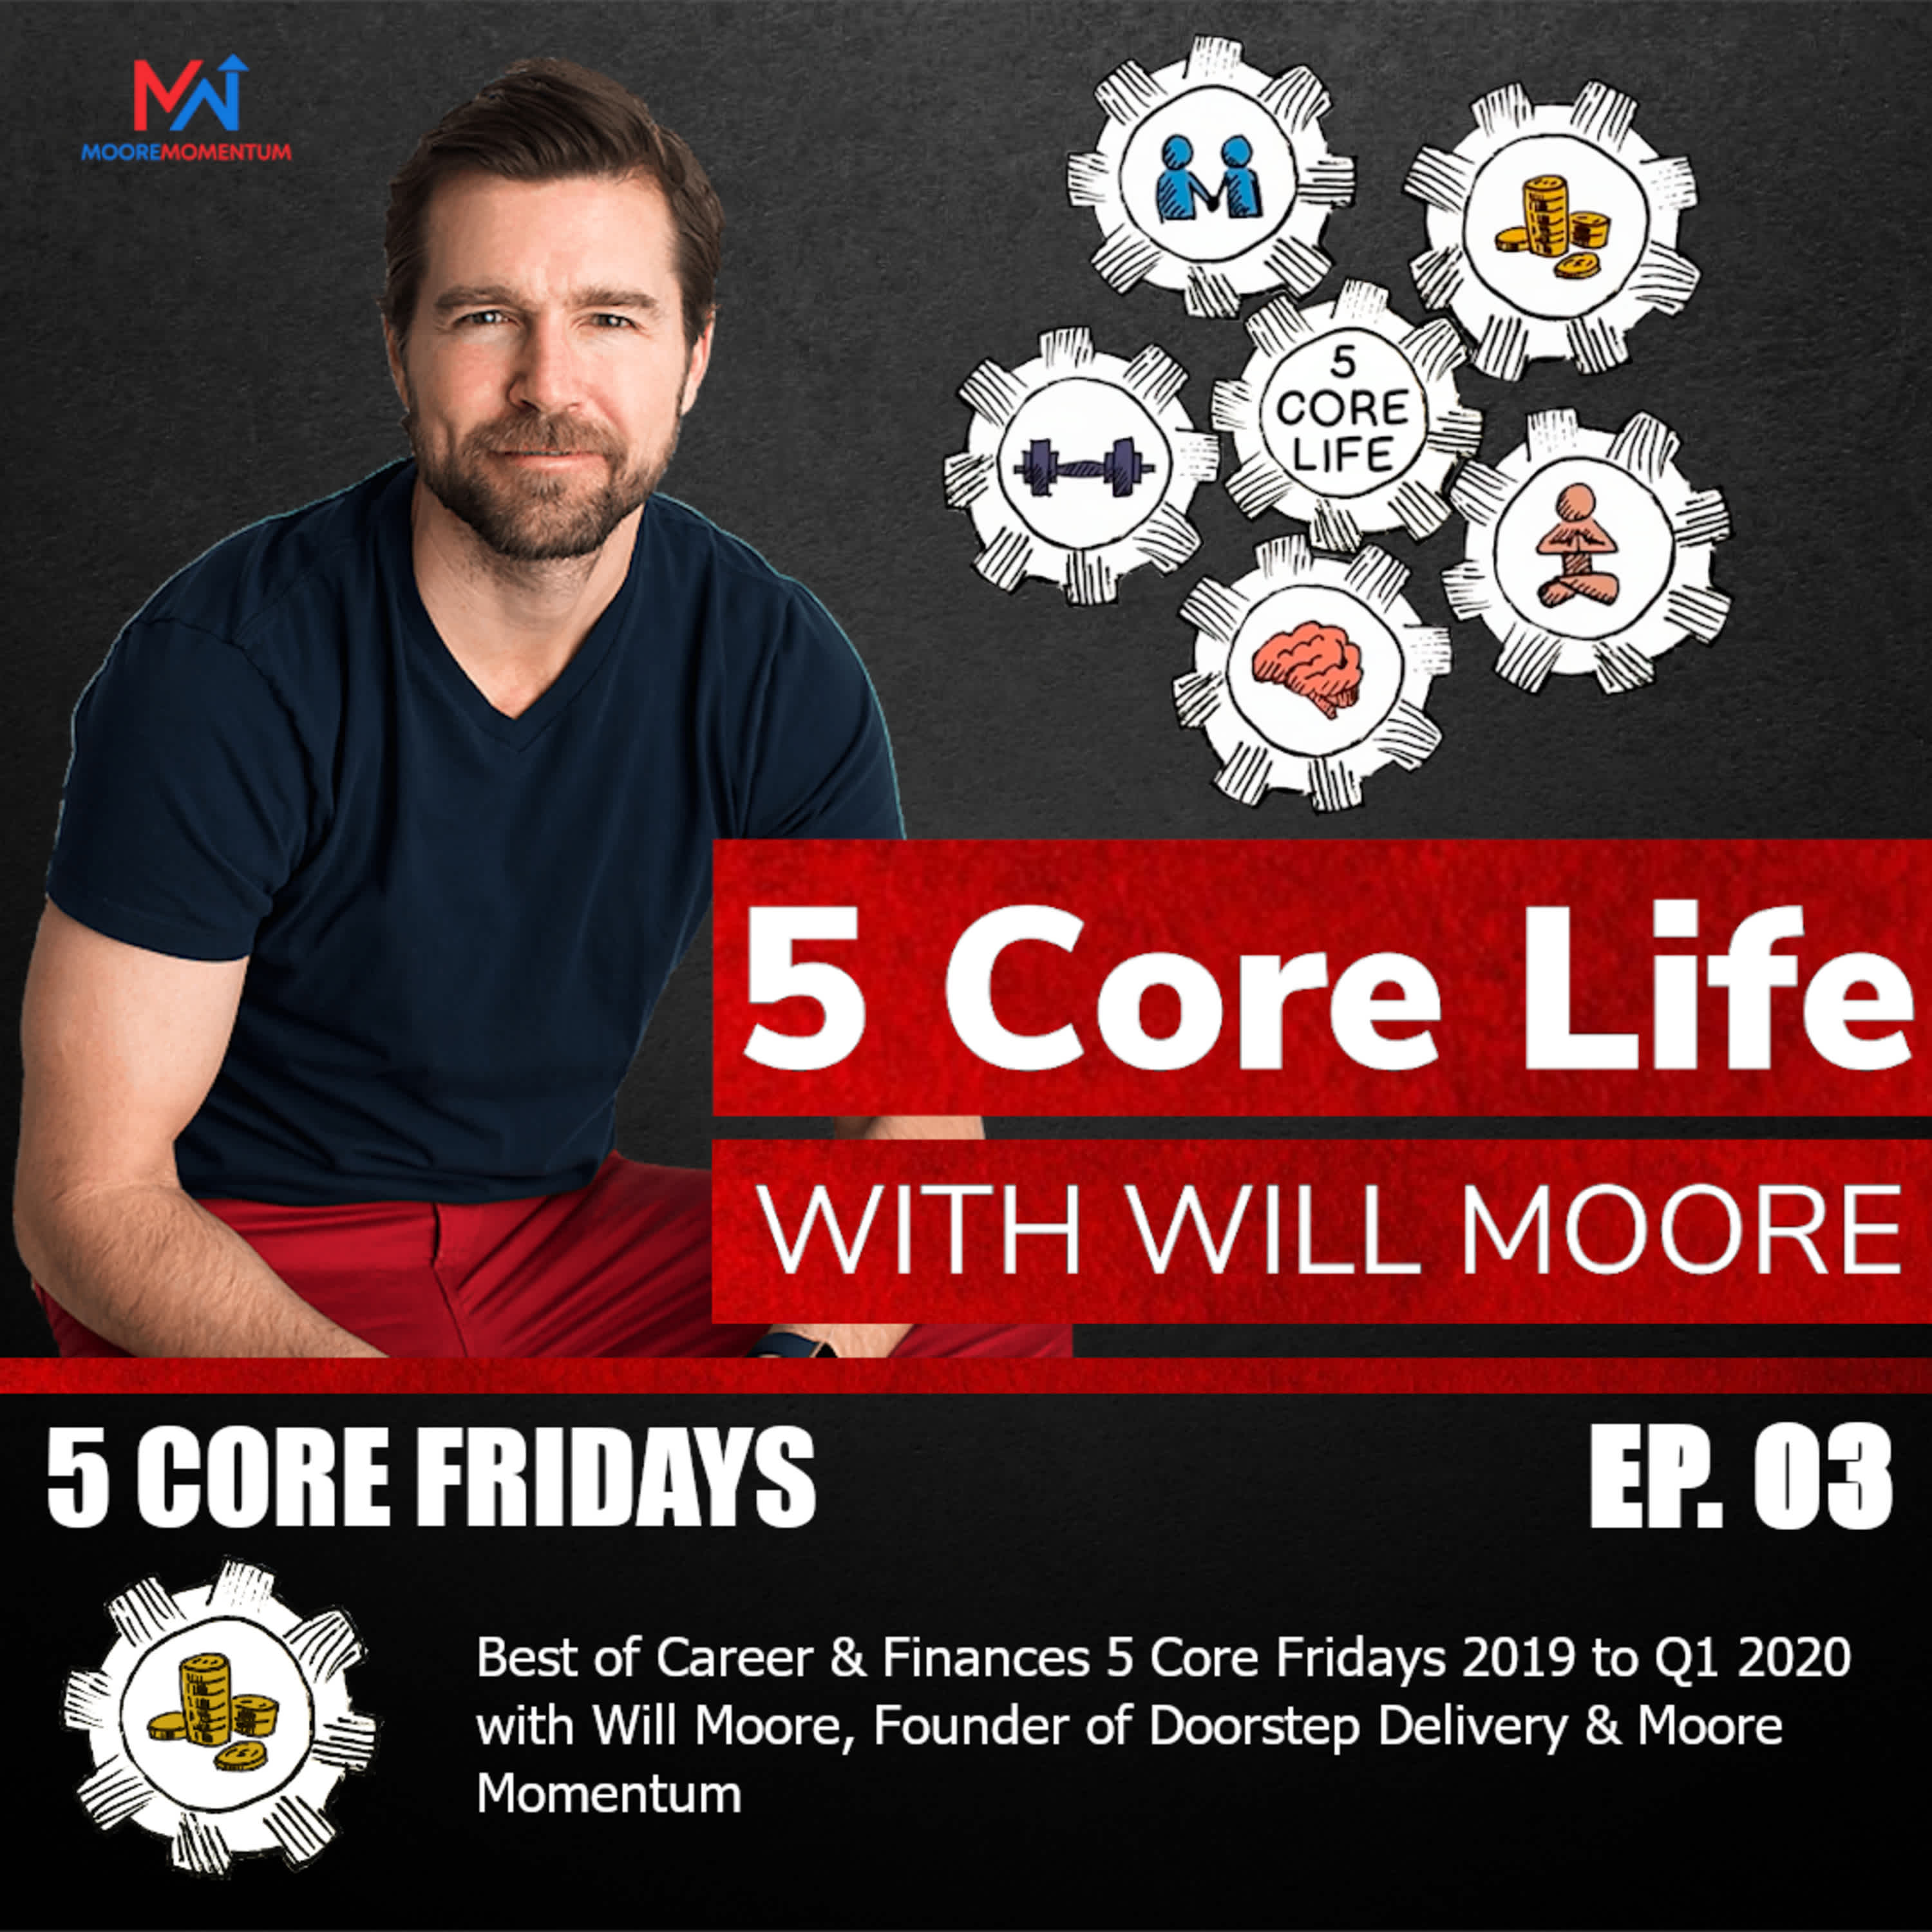 Best of Career & Finances 5 Core Fridays 2019 to Q1 2020 with Will Moore, Founder of Doorstep Delivery & Moore Momentum